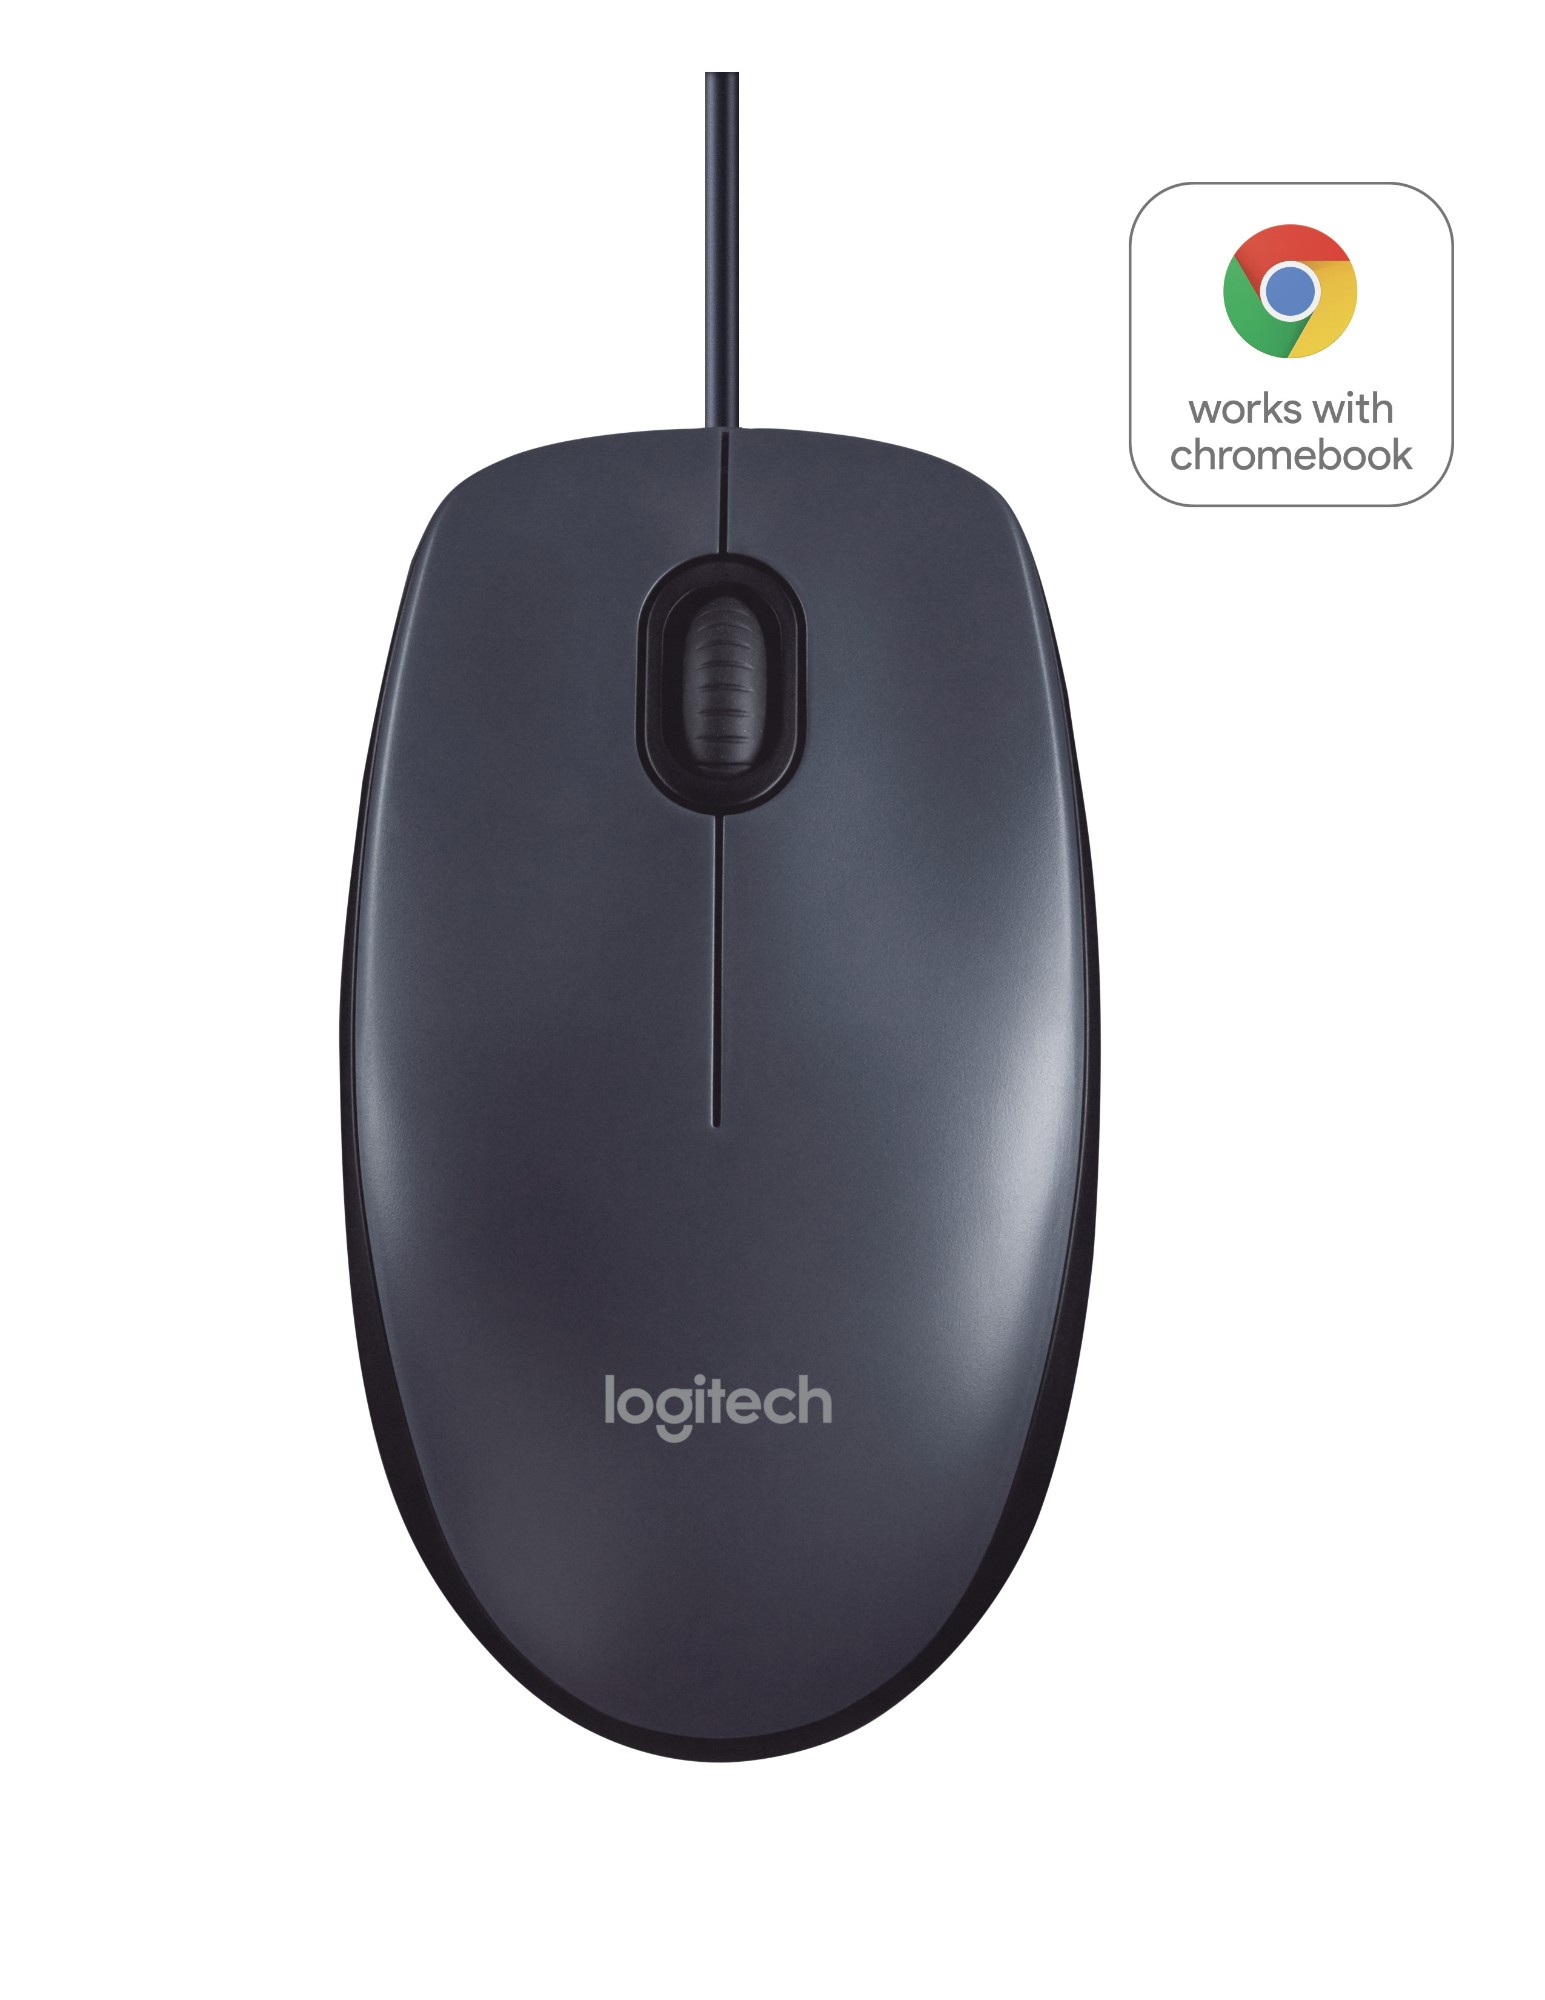 Logitech B100 Optical USB Mouse, 50818 in distributor/wholesale stock for  resellers to sell - Stock In The Channel